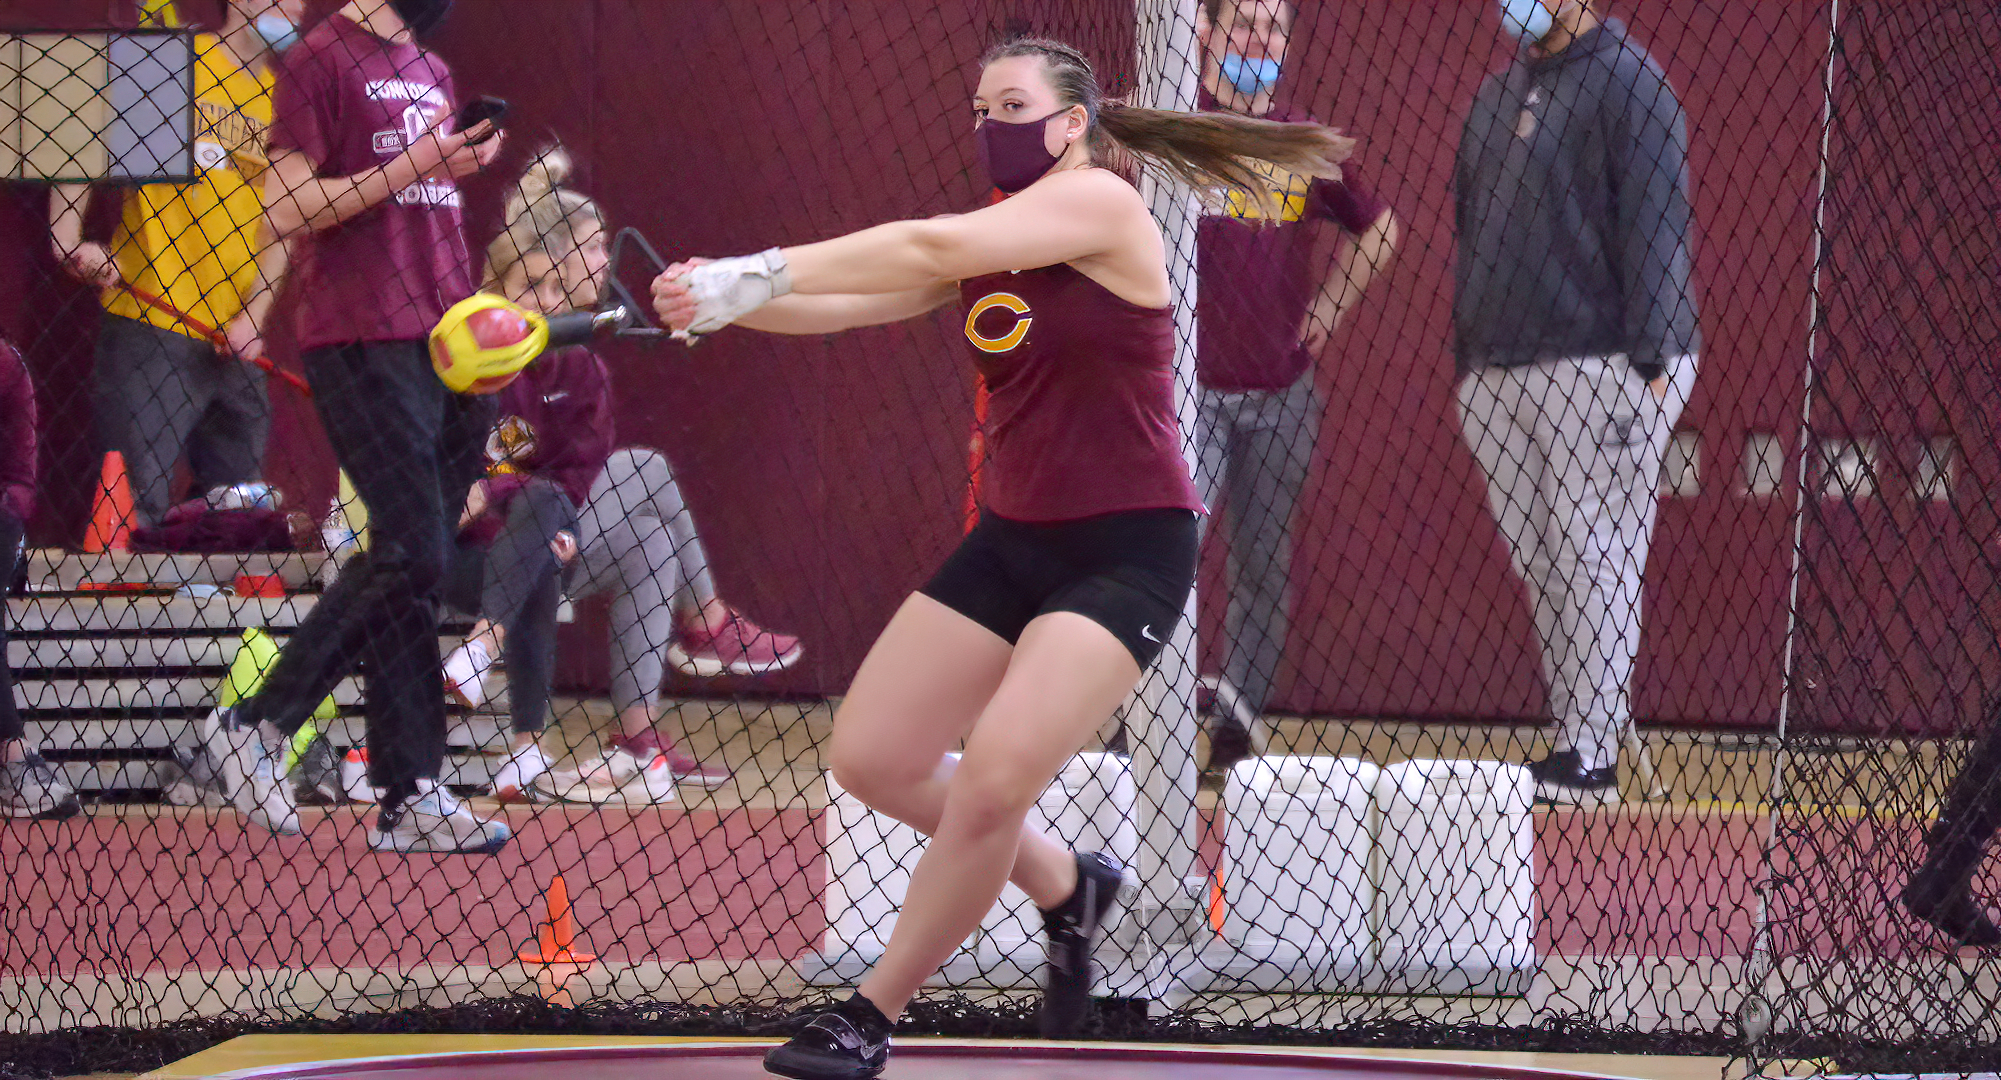 Cayle Hovland had the top finish for the Cobbers on Day 1 at the MIAC Meet. She placed second in the weight throw with a PR mark of 53-07.50.